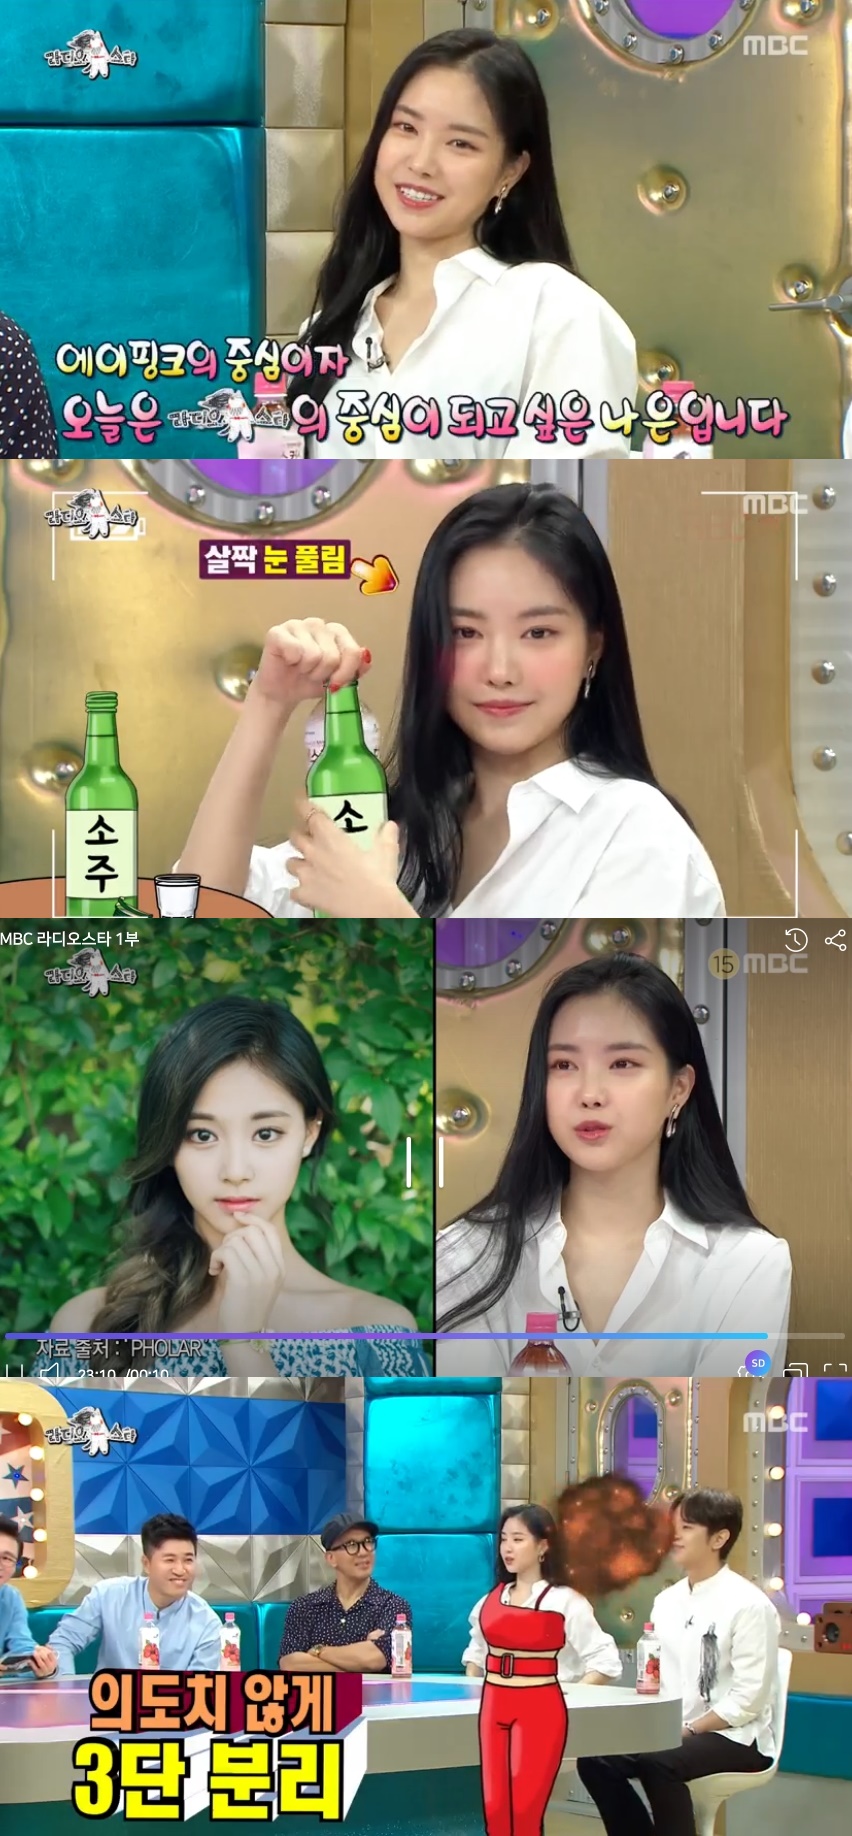 Radio Star Son Na-eun showed off his candid talk.In MBCs Radio Star, which aired on the 1st, four visual centers of each group, Kim Jong-min, Koo Joon-yeop, Son Na-eun and Kim Jung-hoon, appeared in a special feature of Youre Eating Your Face, showing off their outstanding performance as much as visuals.Son Na-eun, visual center for Idol Apink in his eighth year debut, said: Radio Star will be the first to appear.Today, he introduced himself as the center of Radio Star. He said, I did not send it to the entertainment company at the beginning of my debut.I have not been out for a few years except for group entertainment because of SinB, but when I was in my eighth year, I wanted to go out and talk about what I was like. When MCs asked about Son Na-euns image of a wall girl, he said, It was originally a personality, and at the beginning of his debut, there was a ban on love.So when I got in touch, I really refused to be formal. So I did not have anyone coming because the image was strong. MC Yoon Jong Shin told Son Na-eun, It is so natural beauty. It is nature. It is too natural if you have done it honestly.So Son Na-eun laughed at the topic, We are the first ones? Son Na-eun said, We manage a little bit after the subsequent molding question.I like a man and a friendly man. He likes to be an athlete. He likes to be an athlete.I like the sport of all sports as well as baseball. Recently, I mentioned Son Heung-min, Yong-Ae player of the World Cup.In particular, Kim Kook-jin said, Cosmetics. Soju. I shot a lot of CFs such as bags.So Son Na-eun replied, I do not have a bone, but now it comes out too naturally.At this time, when Gim Gu-ra proposed a facial expression, Son Na-eun realized the Soju-picking facial expression with a bottle of beverage.Furthermore, Gim Gu-ra asked for a change in facial expression when he drank from one bottle to four bottles of Soju.So Son Na-eun received the praise of MCs for his detailed and natural activities when he drank from 1 bottle to the last 4 bottles.Son Na-eun mentioned TWICEs Tzuwi as an unrequited Idol these days: It was so beautiful when I was monitoring TWICE groups junior groups.I saw it at the Idol Athletics Competition, and it felt like the Friend was seeing me at the beginning of my debut.Son Na-eun said he was 168cm tall and weighed 48kg and was a little underweight.He said, I was a glass body that was particularly toxic, and I was laughing when I ate a rice cake in my car while I was going to a local performance.